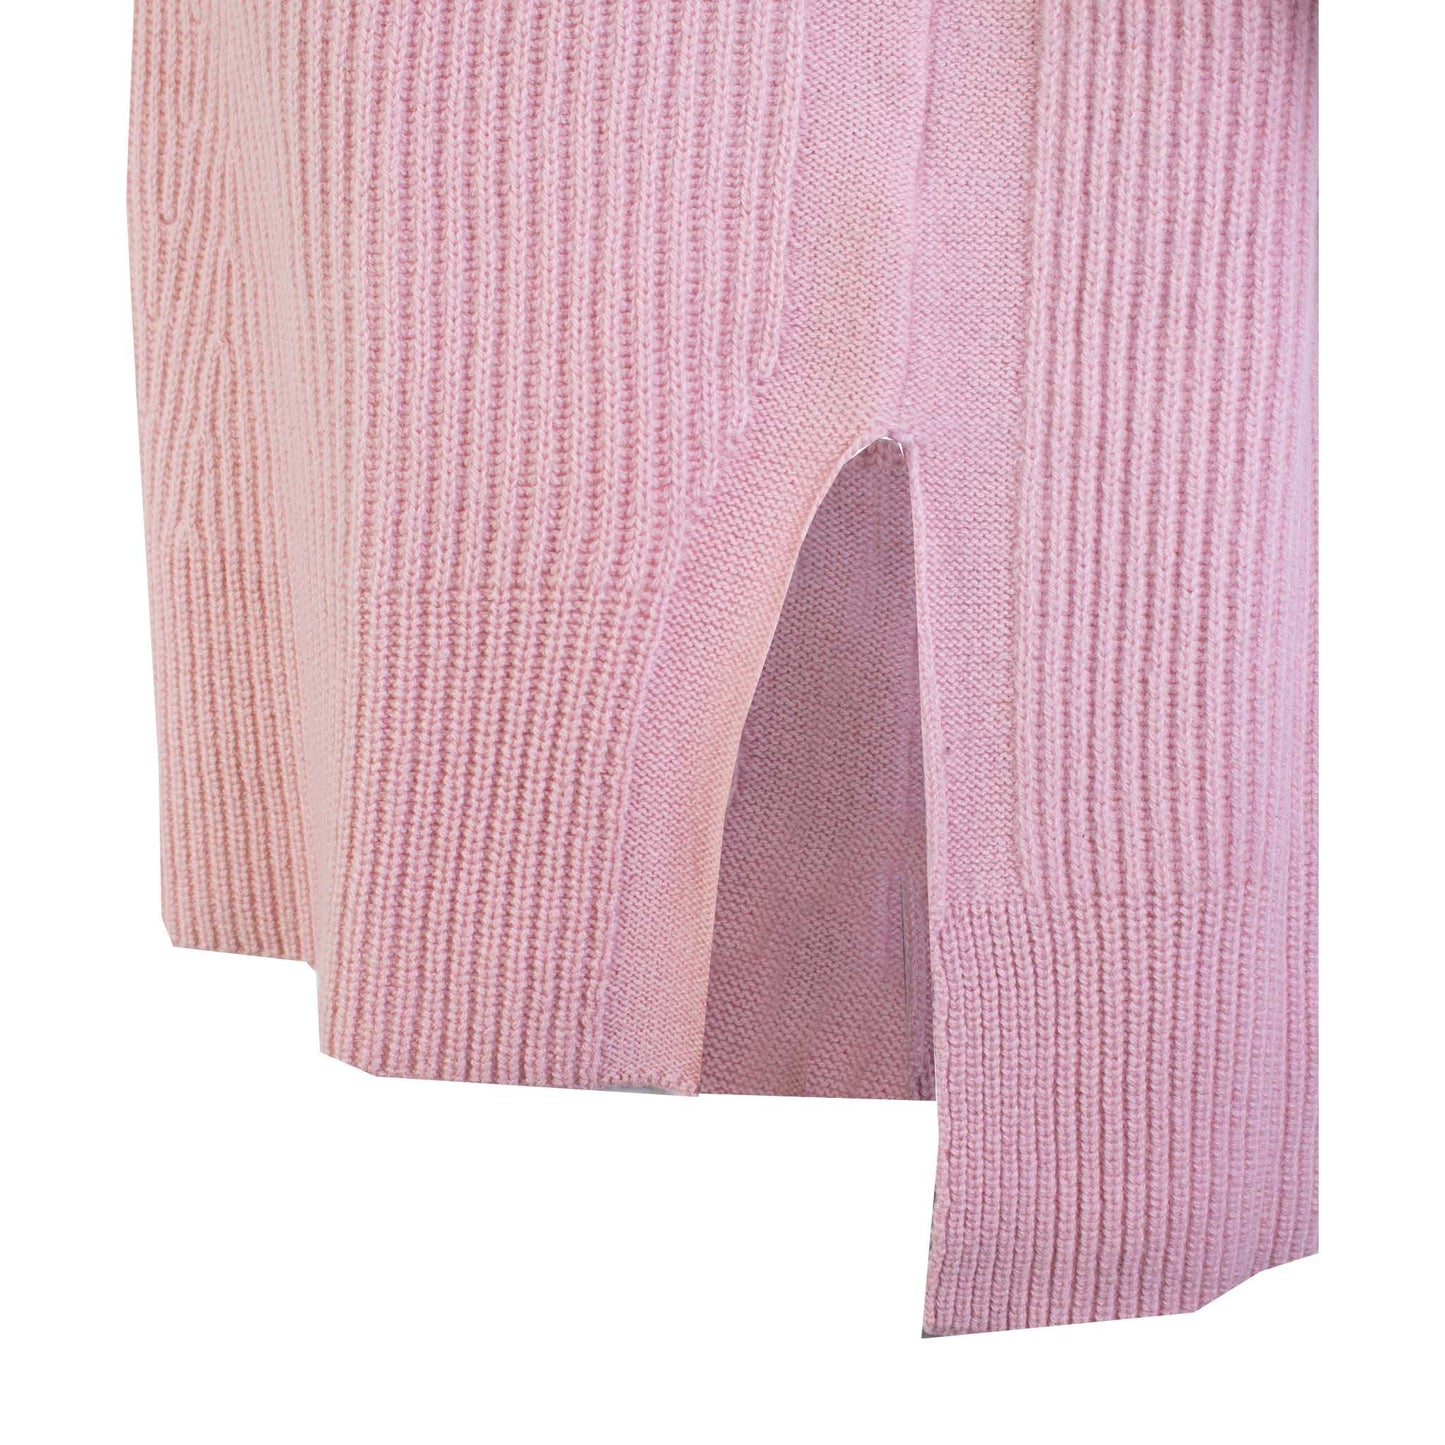 Malo Pink Ribbed Cashmere Sweater